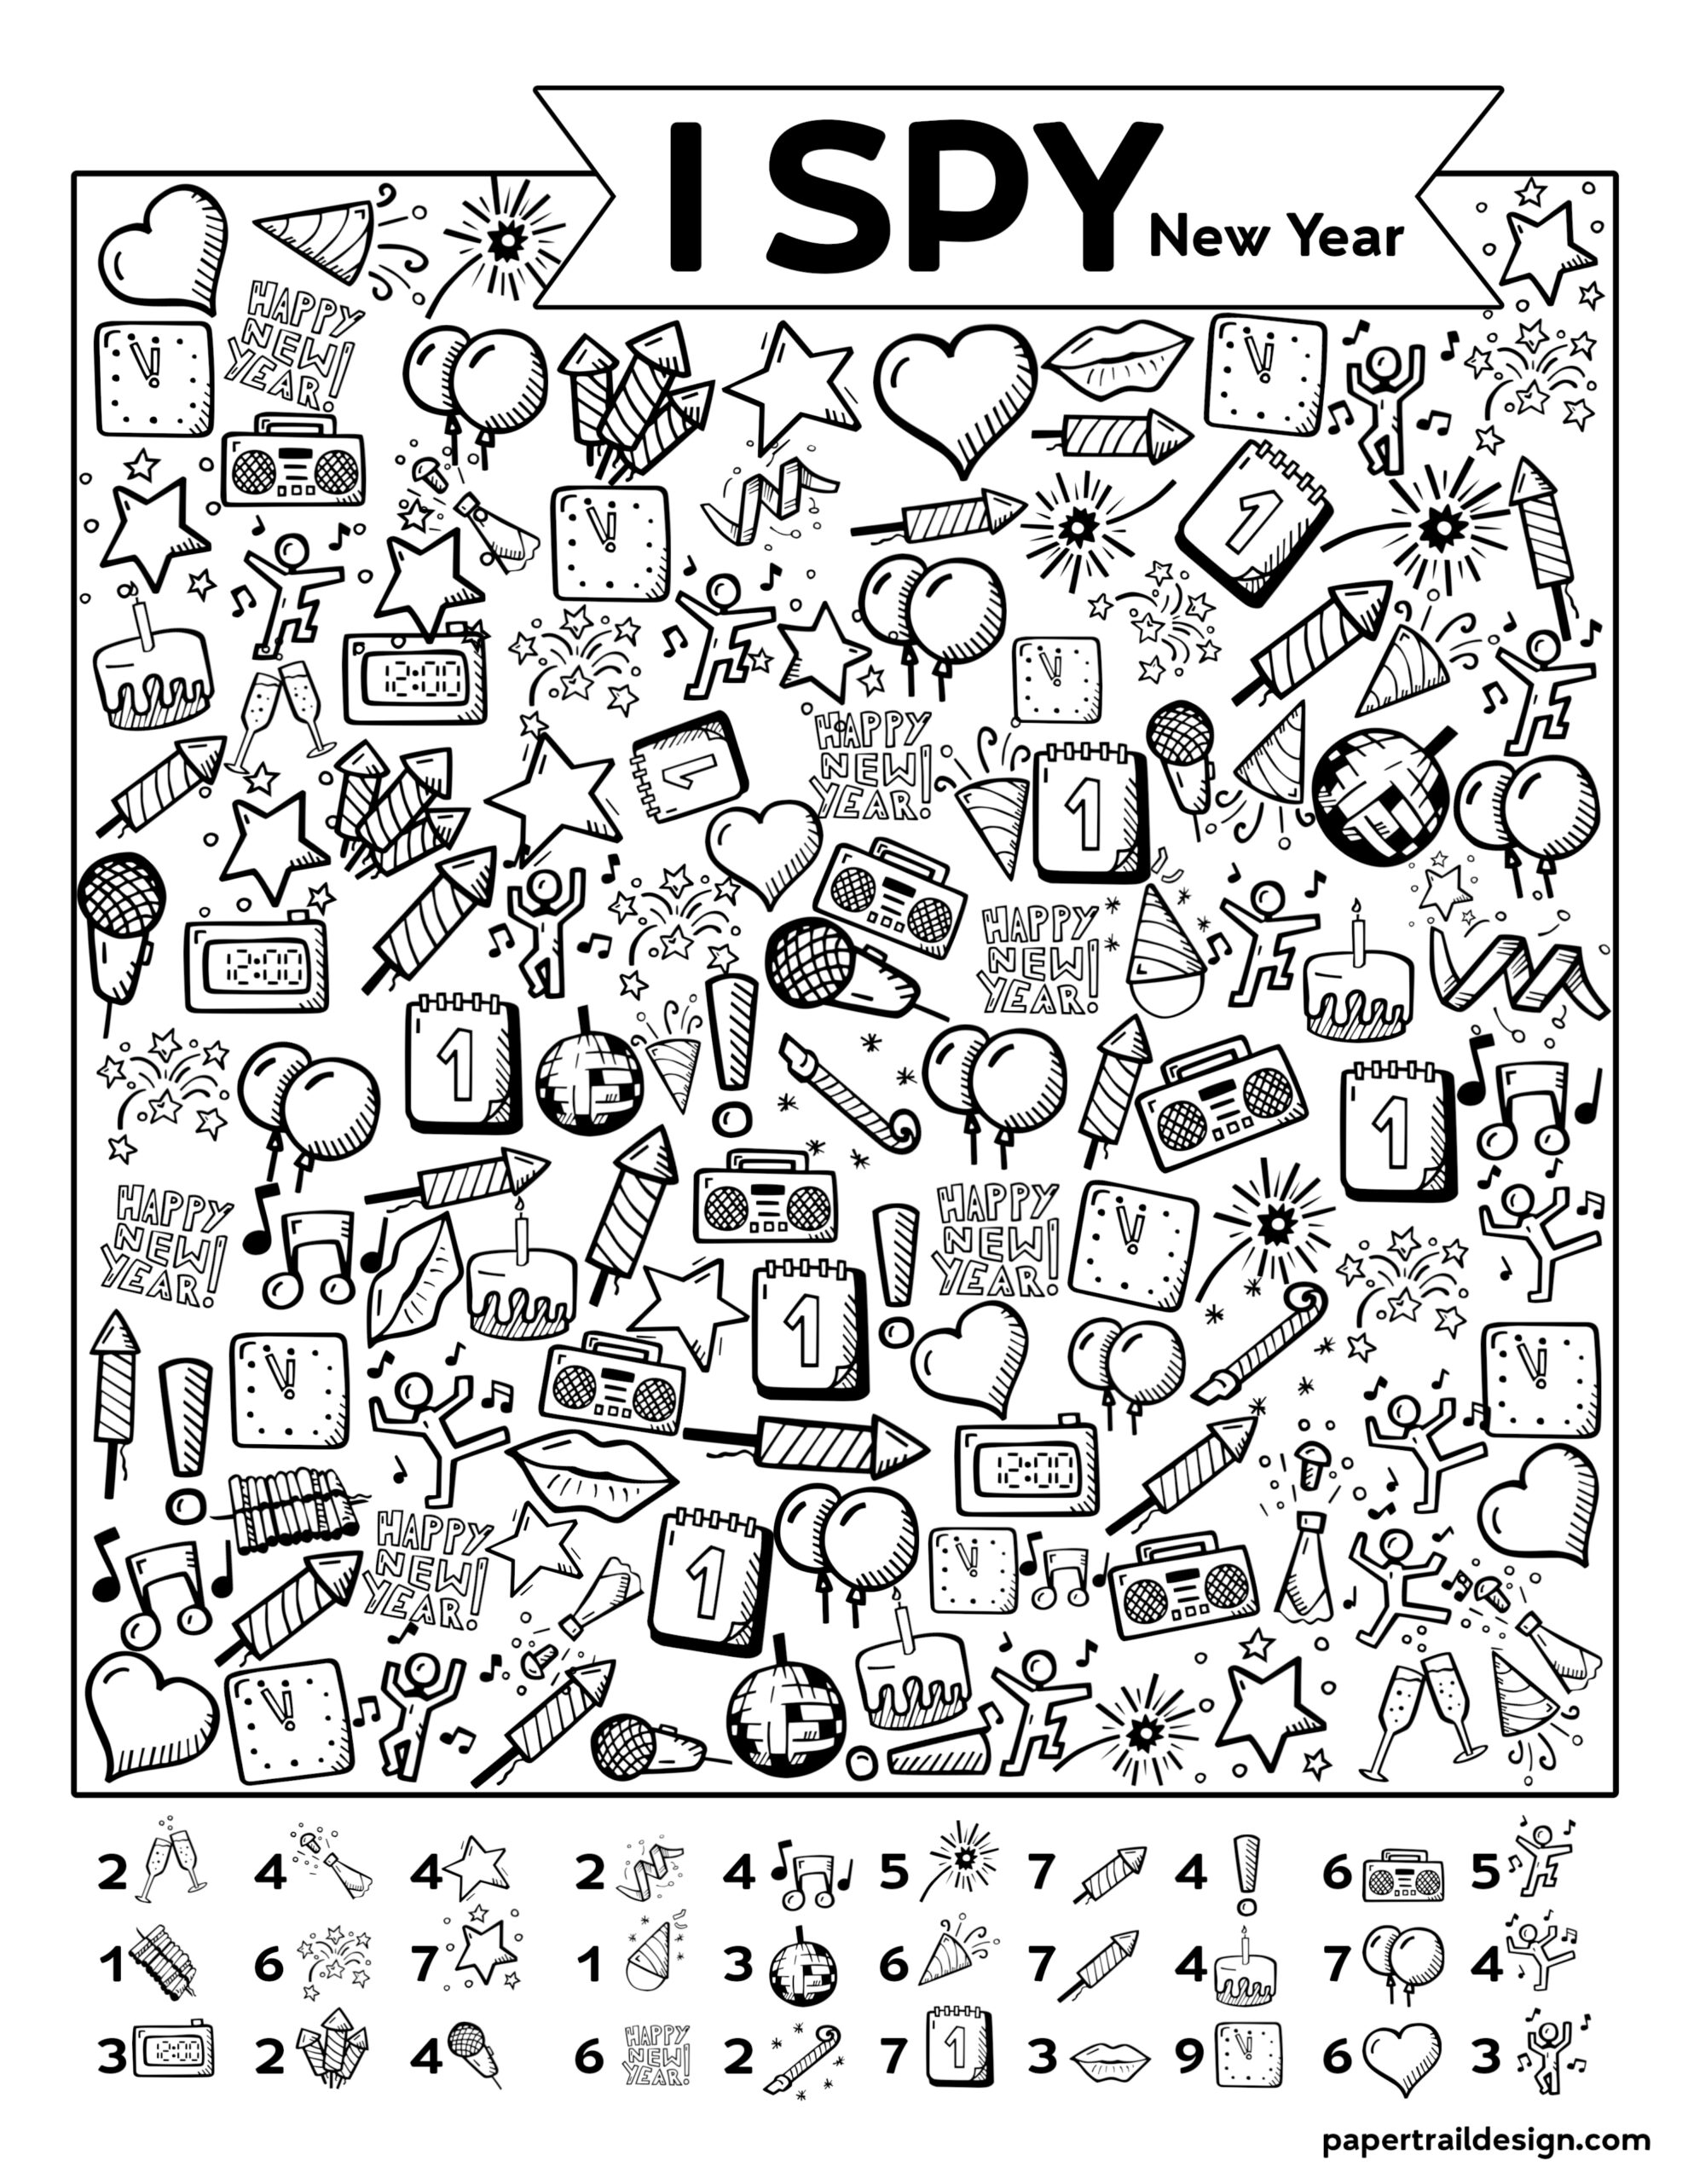 free-printable-new-year-i-spy-activity-paper-trail-design